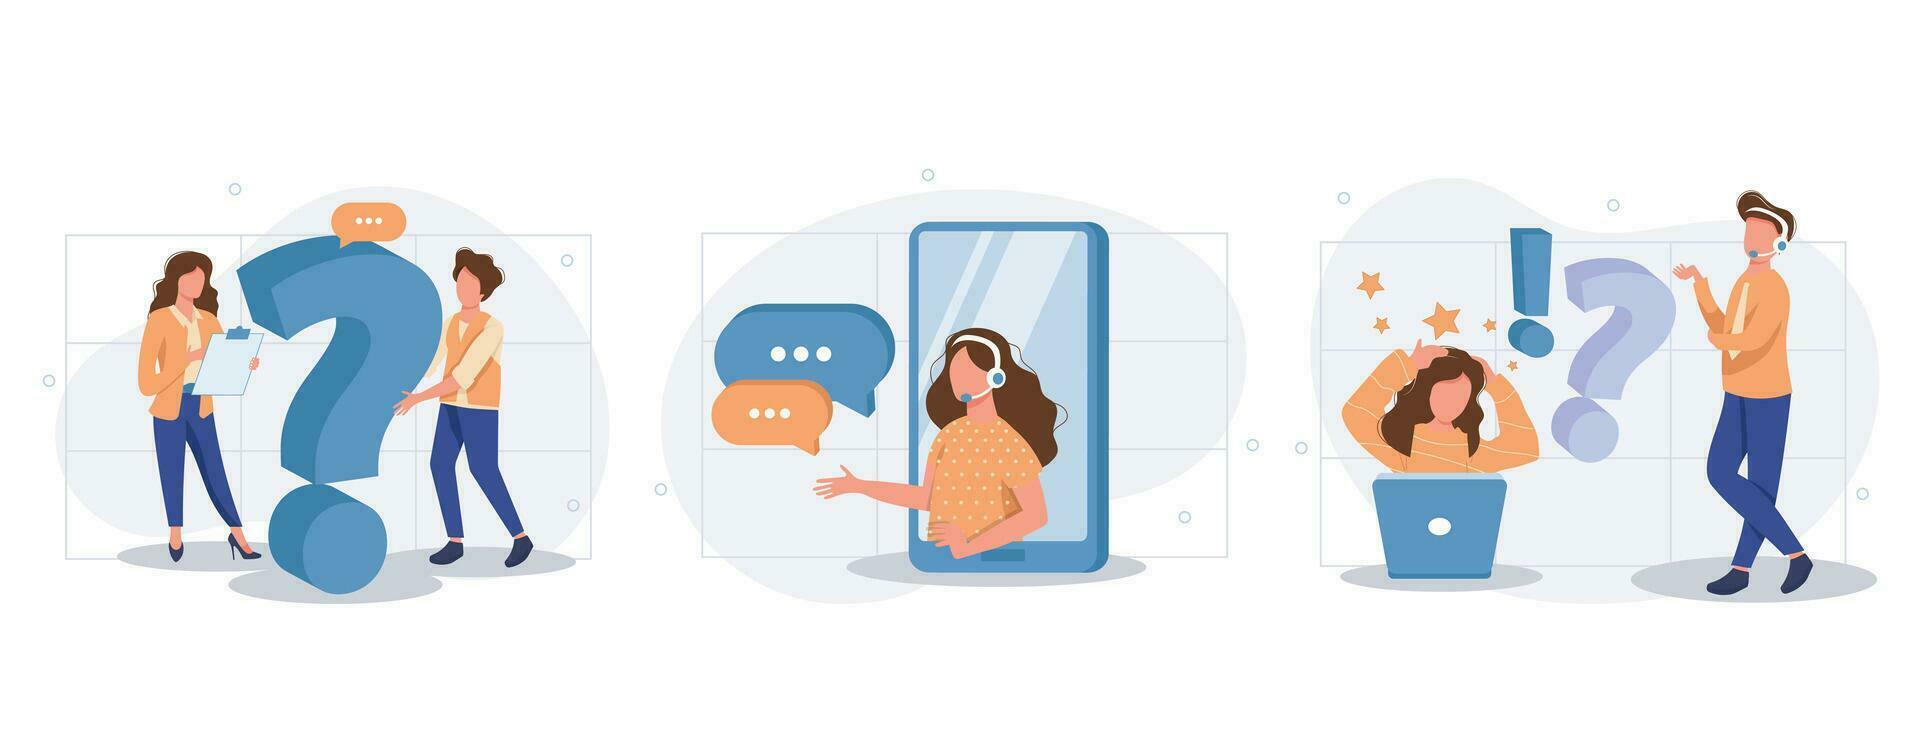 Customer support illustration set. Characters asking a questions, receiving answers from helpdesk operator, sharing user experience and giving customer feedback. Vector illustration.